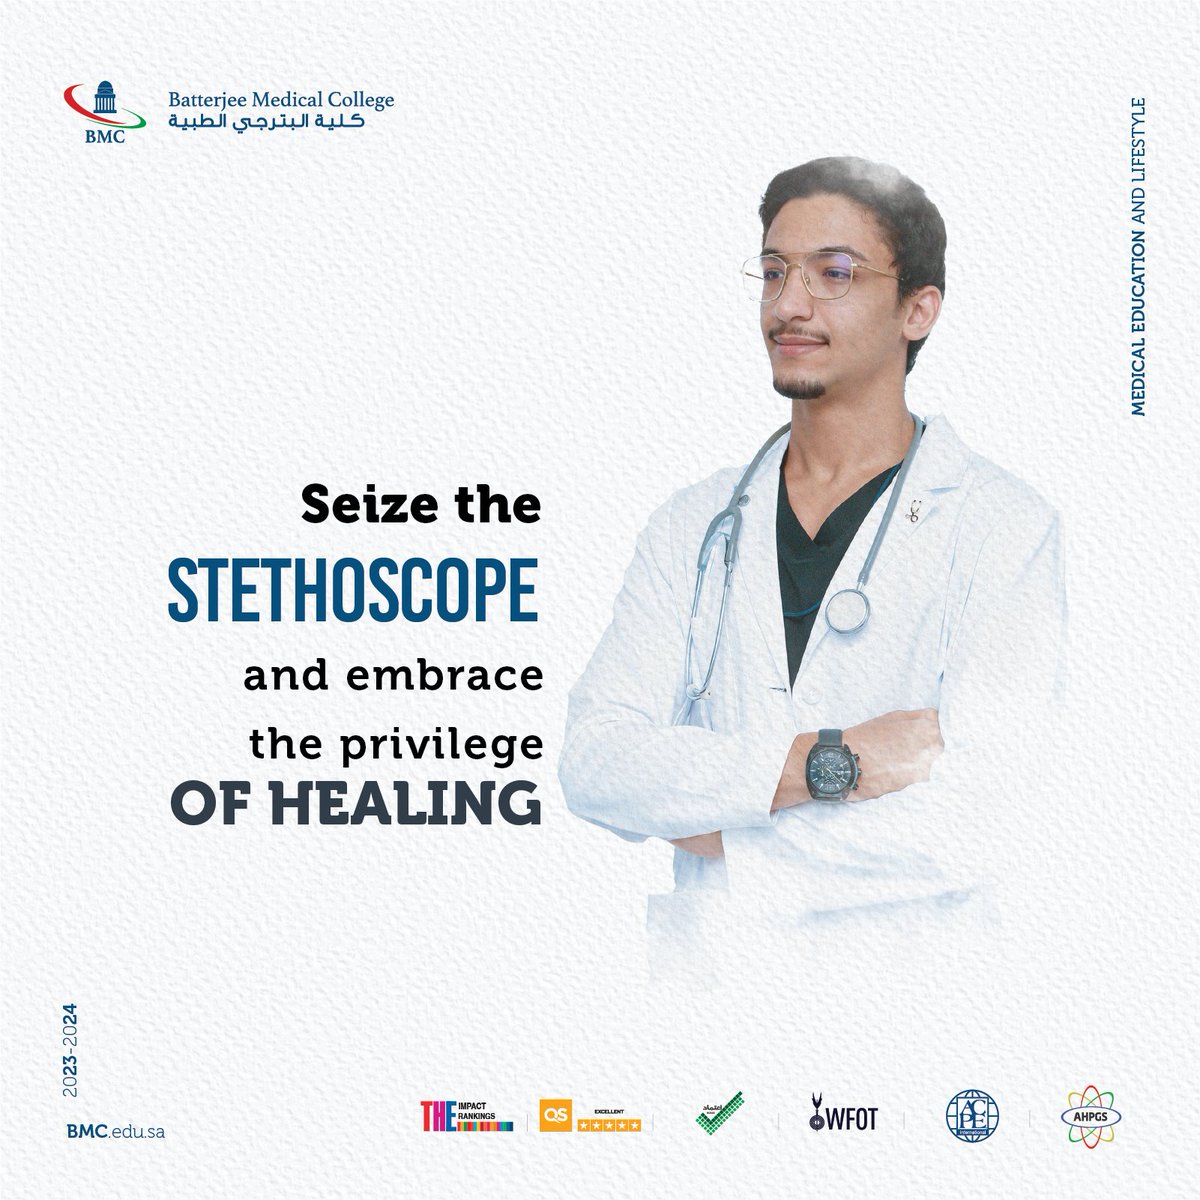 seize the stethoscope and embrace the privilege of healing